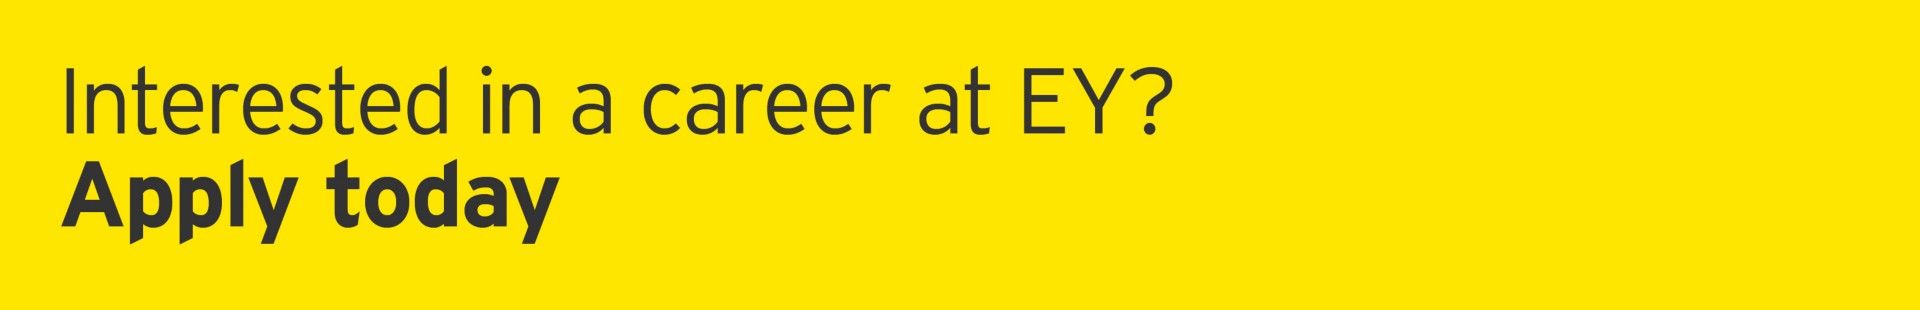 Interested in a career at EY? Apply today.